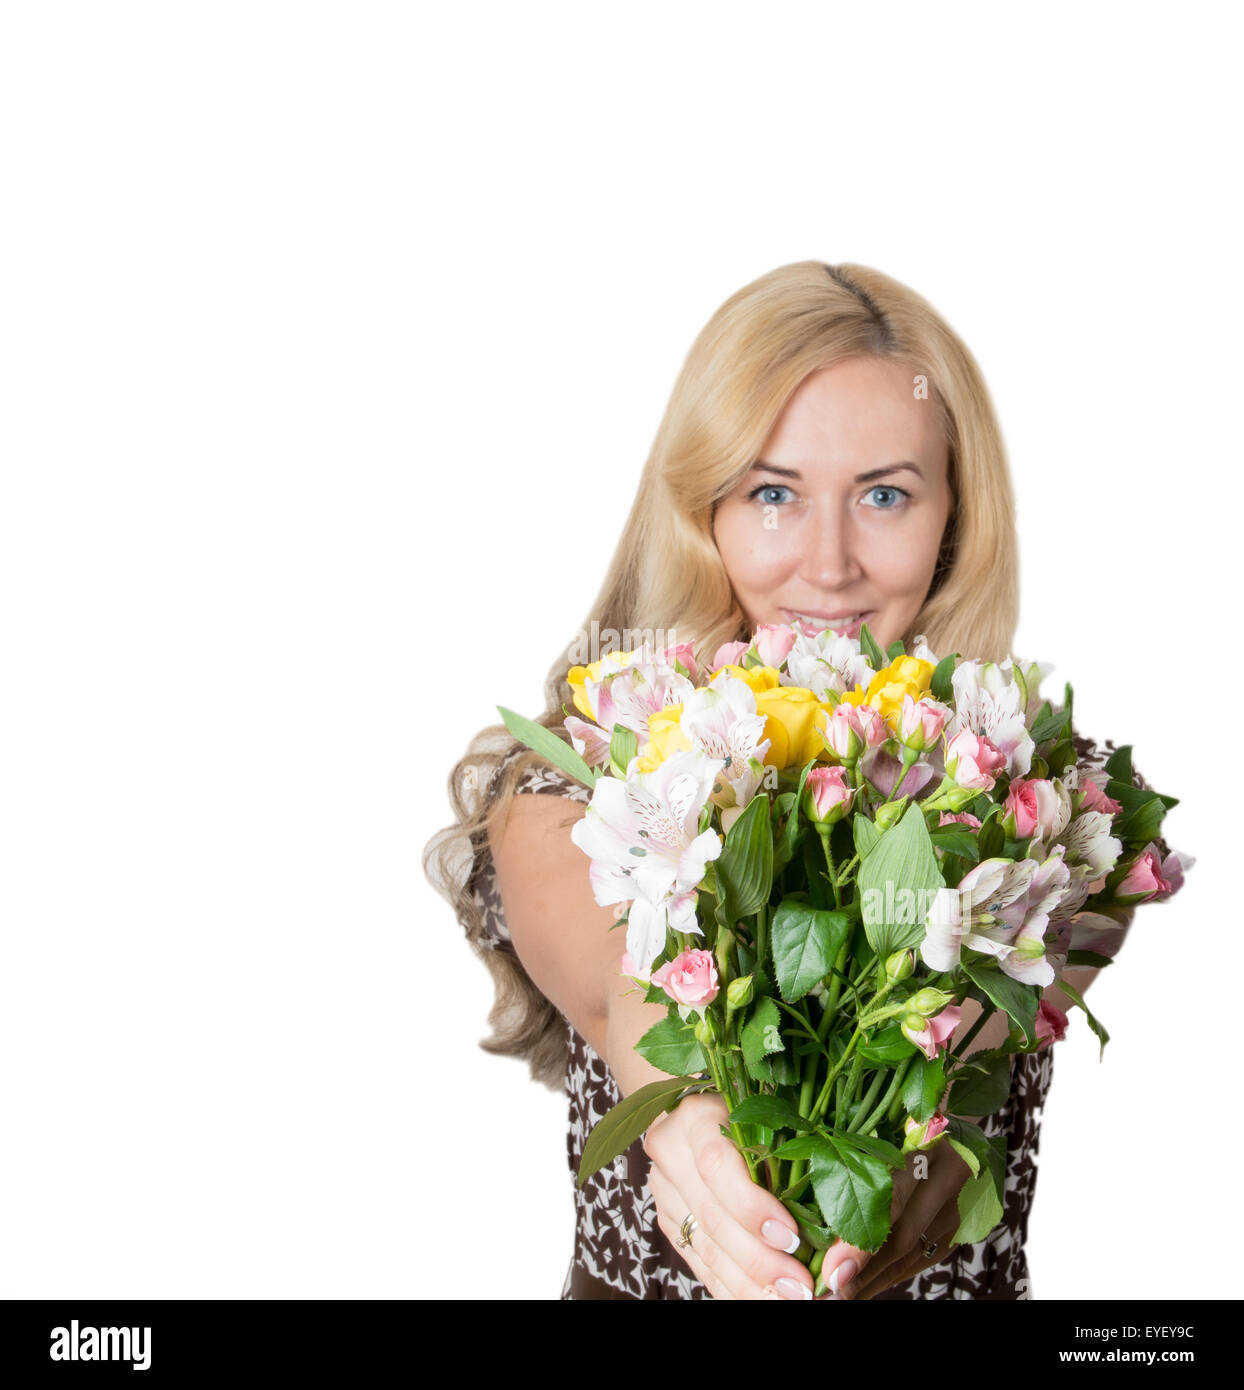 girl with bouquet of flowers Stock Photo